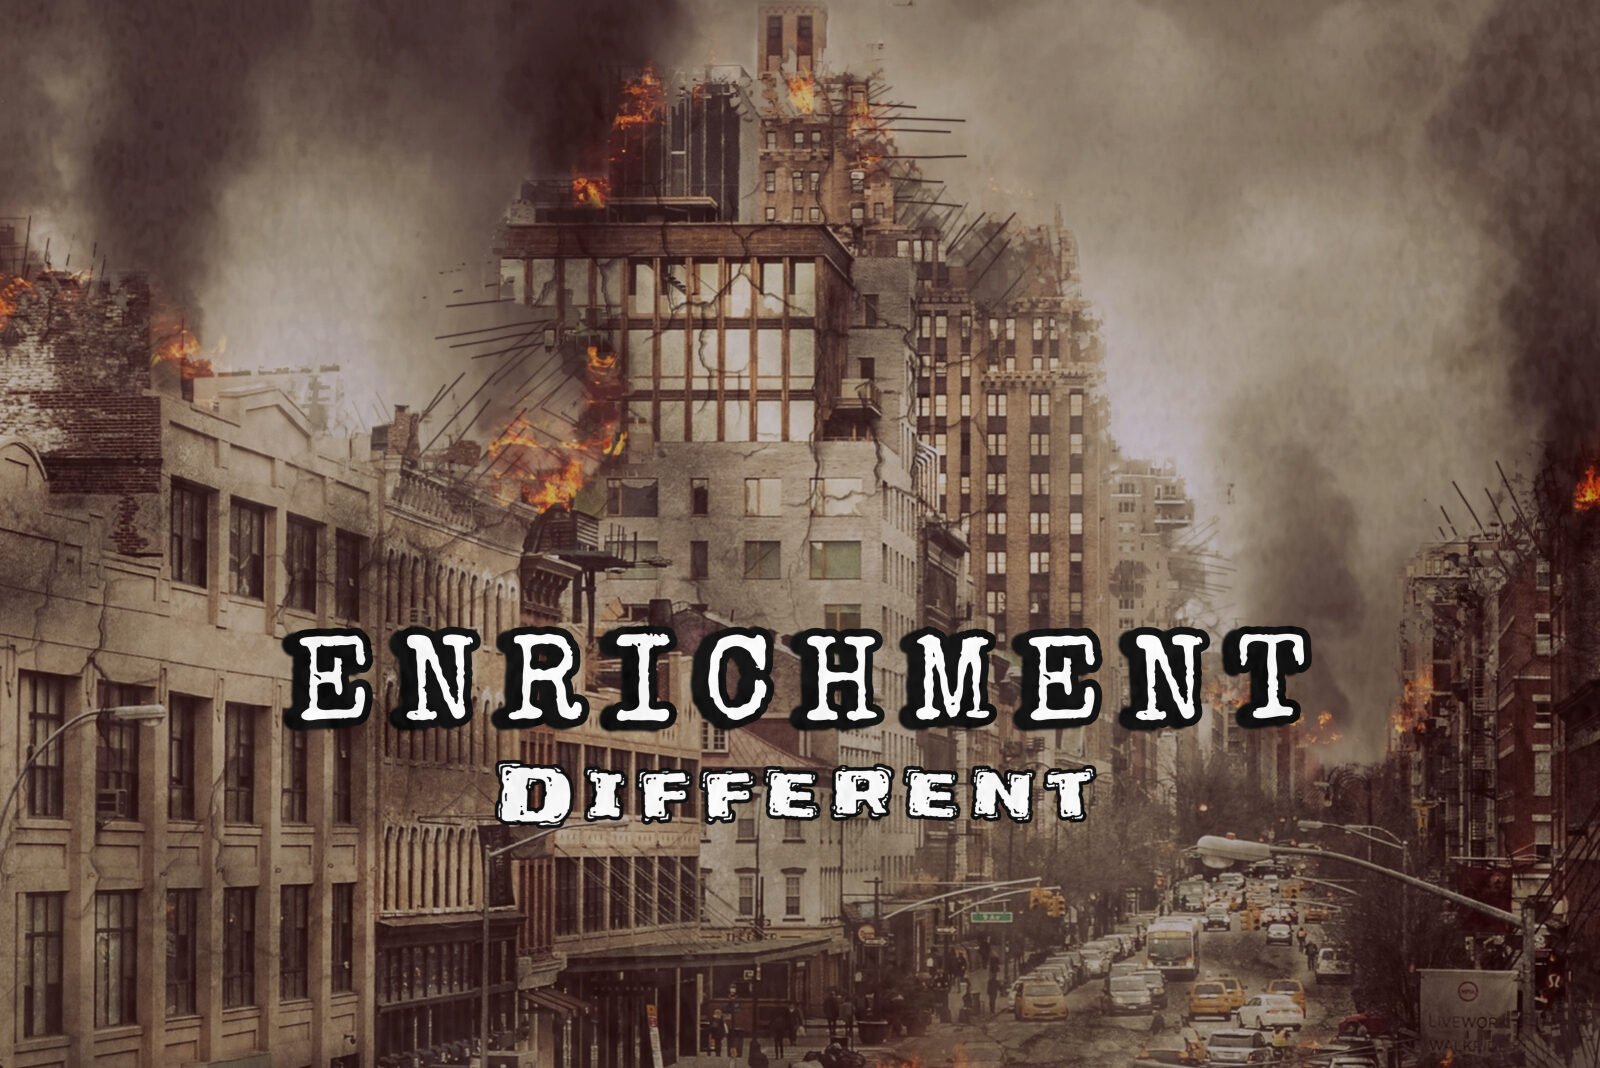 Enrichment, Independent Producer and Artist, Releases Highly-Anticipated Album "Different"